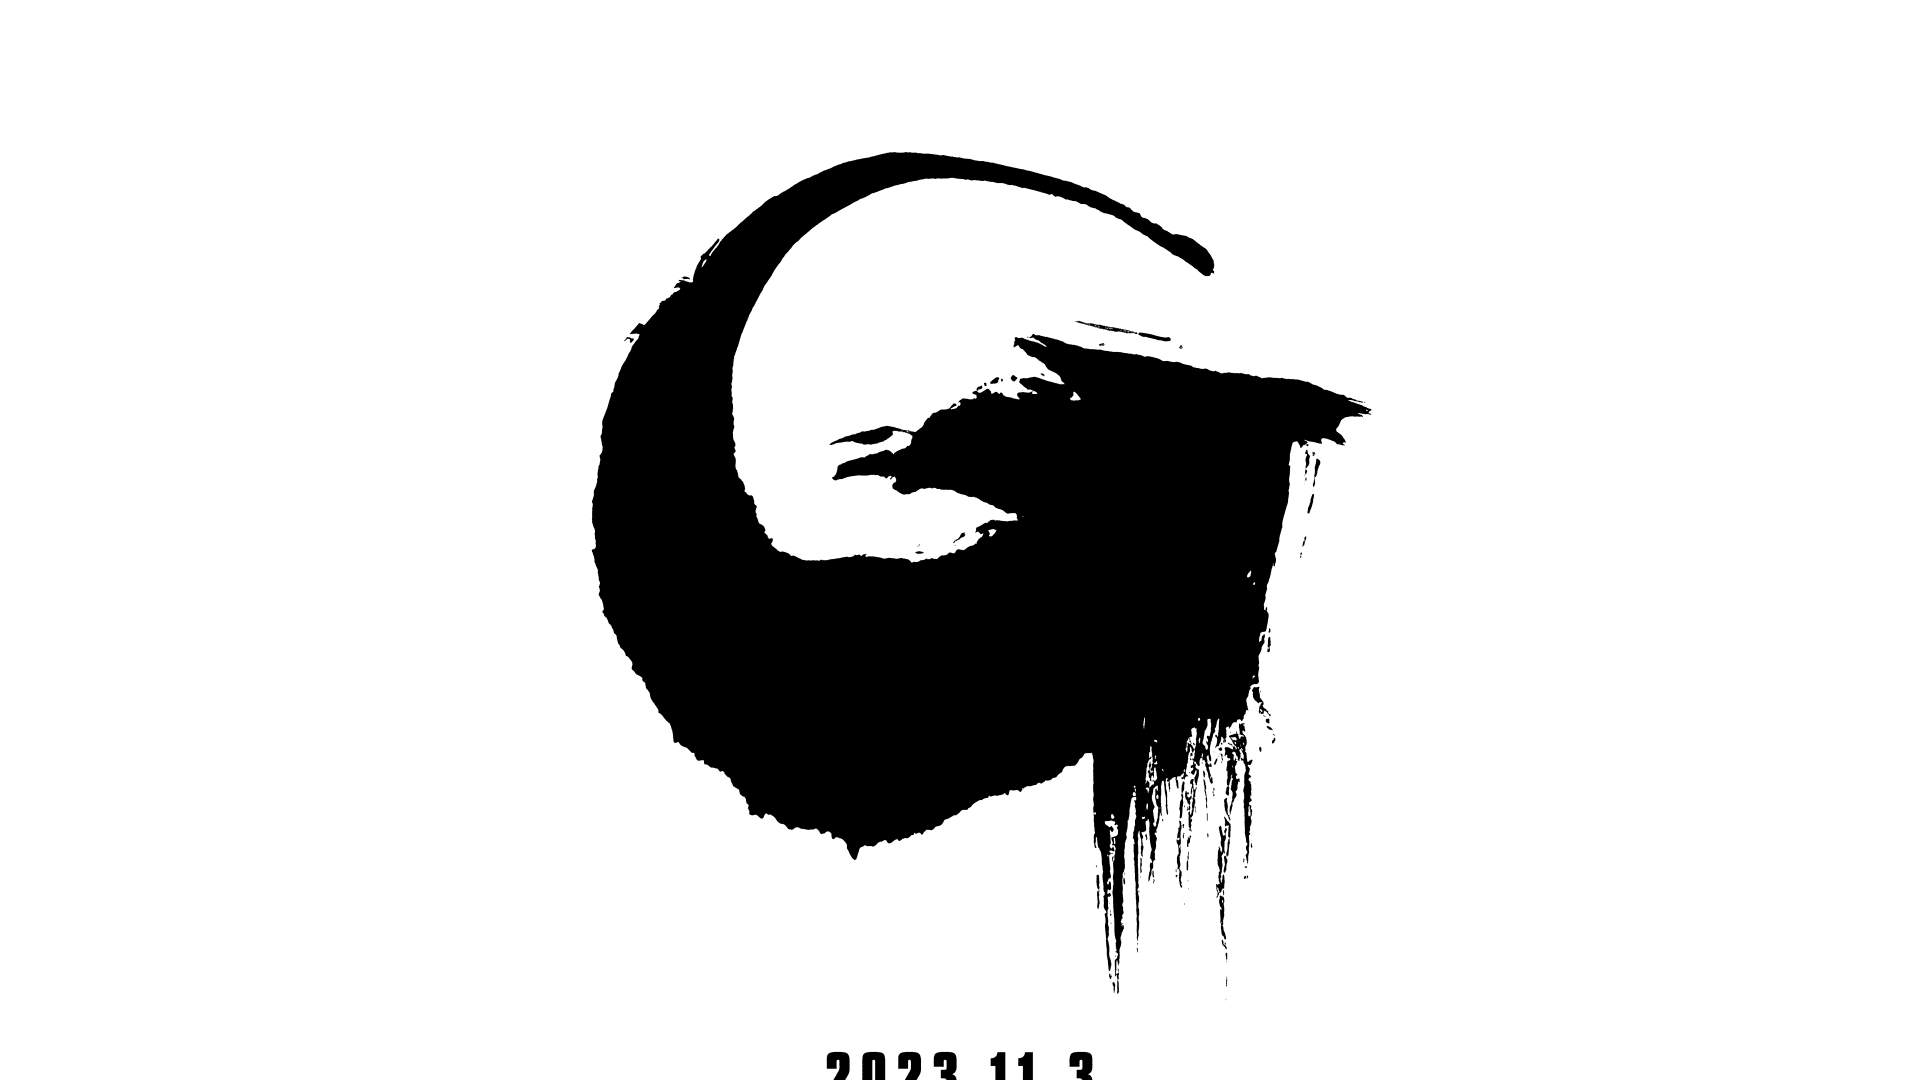 A teaser poster for the film Godzilla due out on Nov. 3rd, 2023.